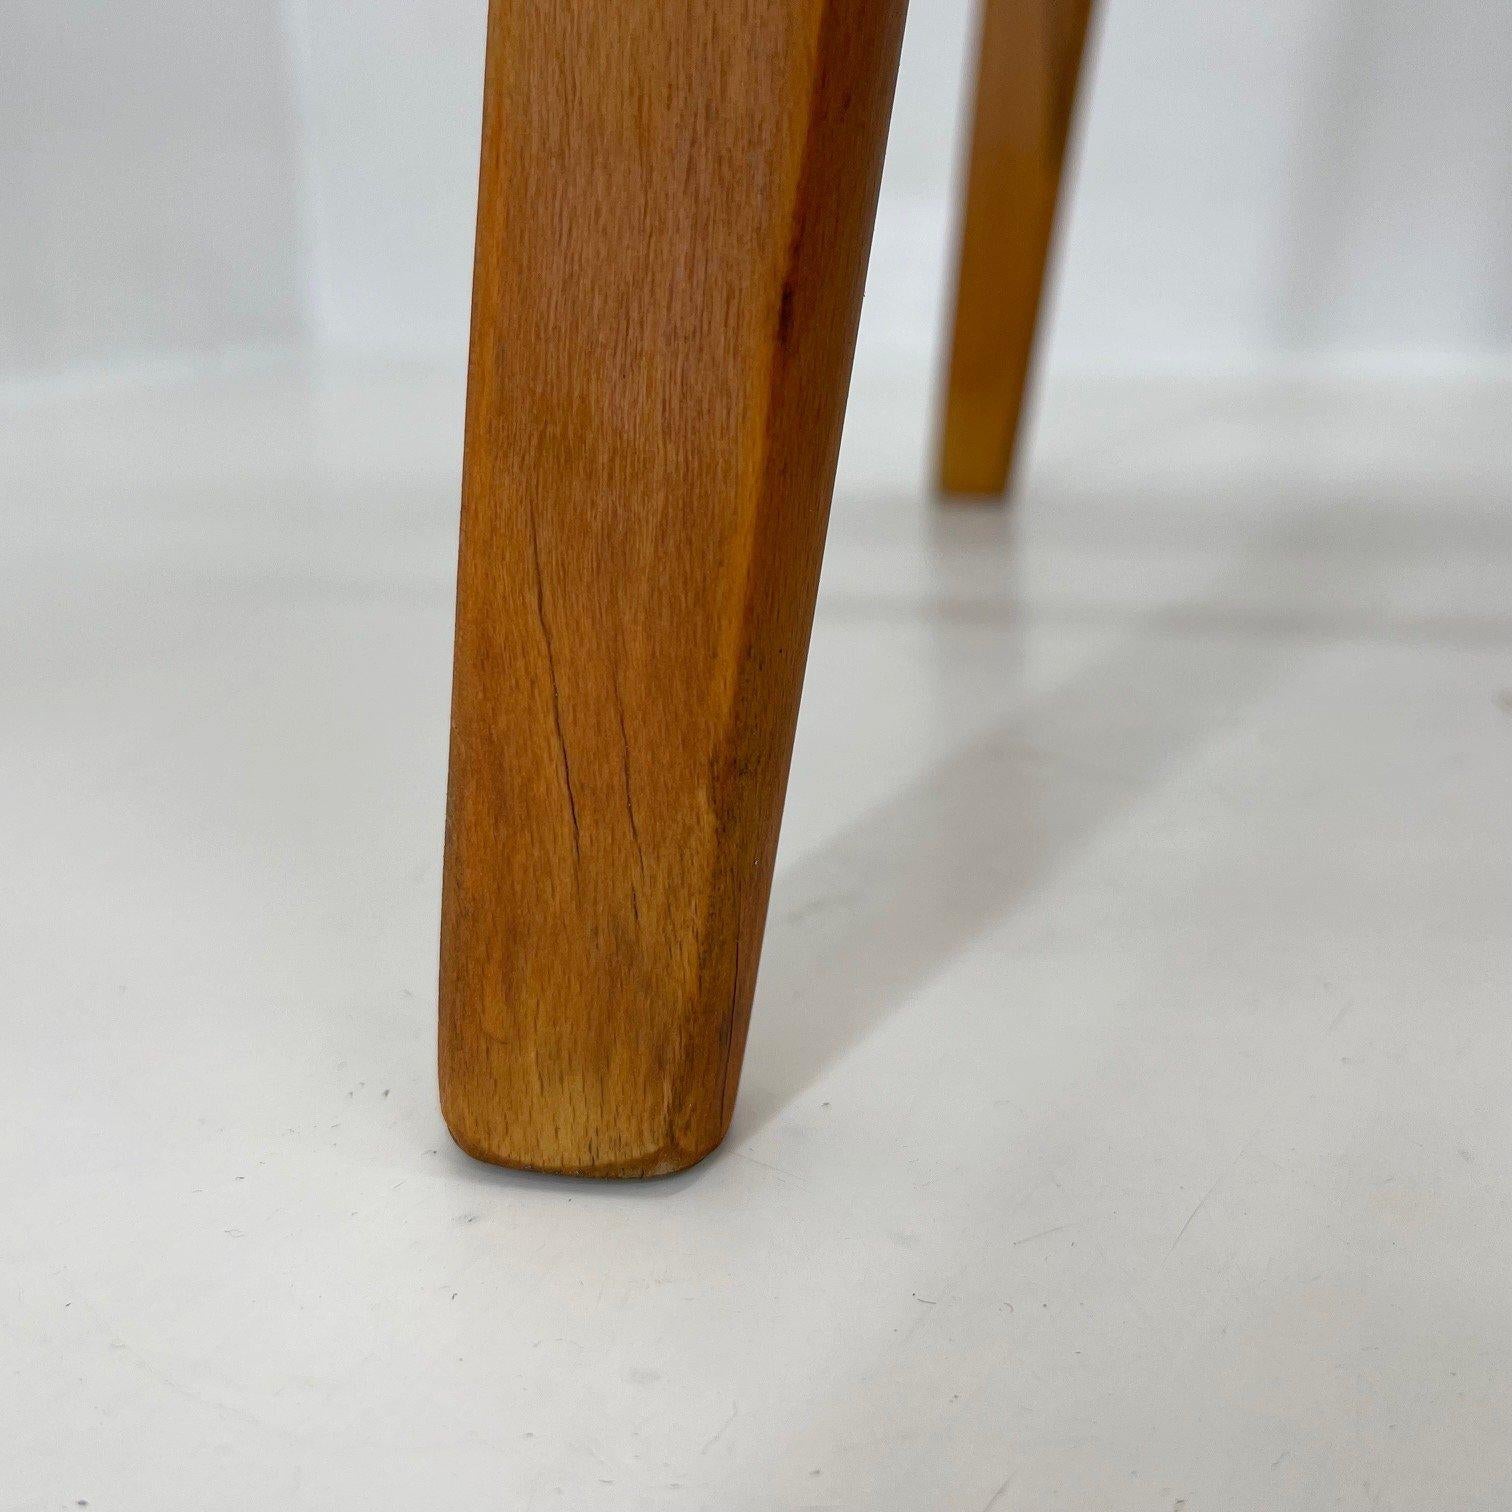 Set of 6 Leatherette & Wood Chairs, Czechoslovakia, 1960's For Sale 6